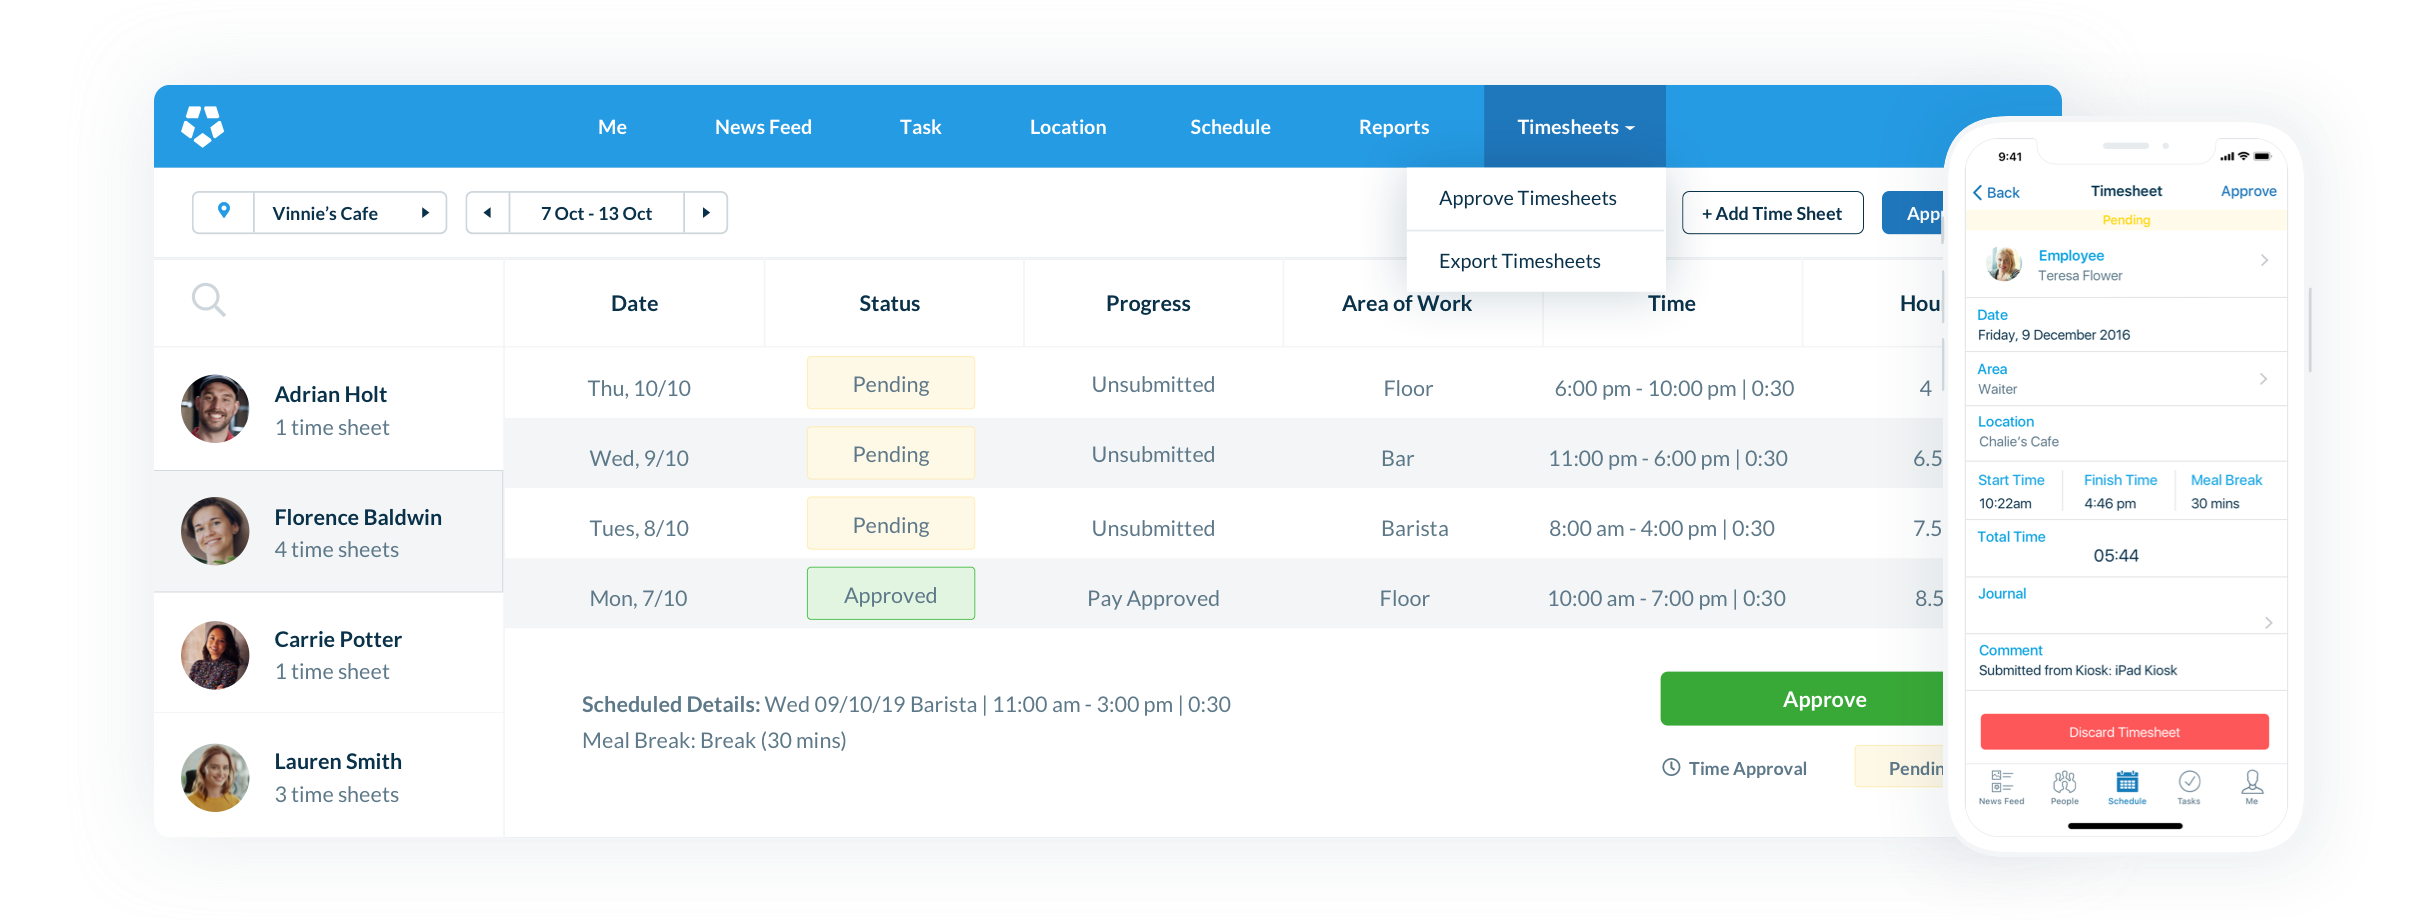 best free employee time clock software